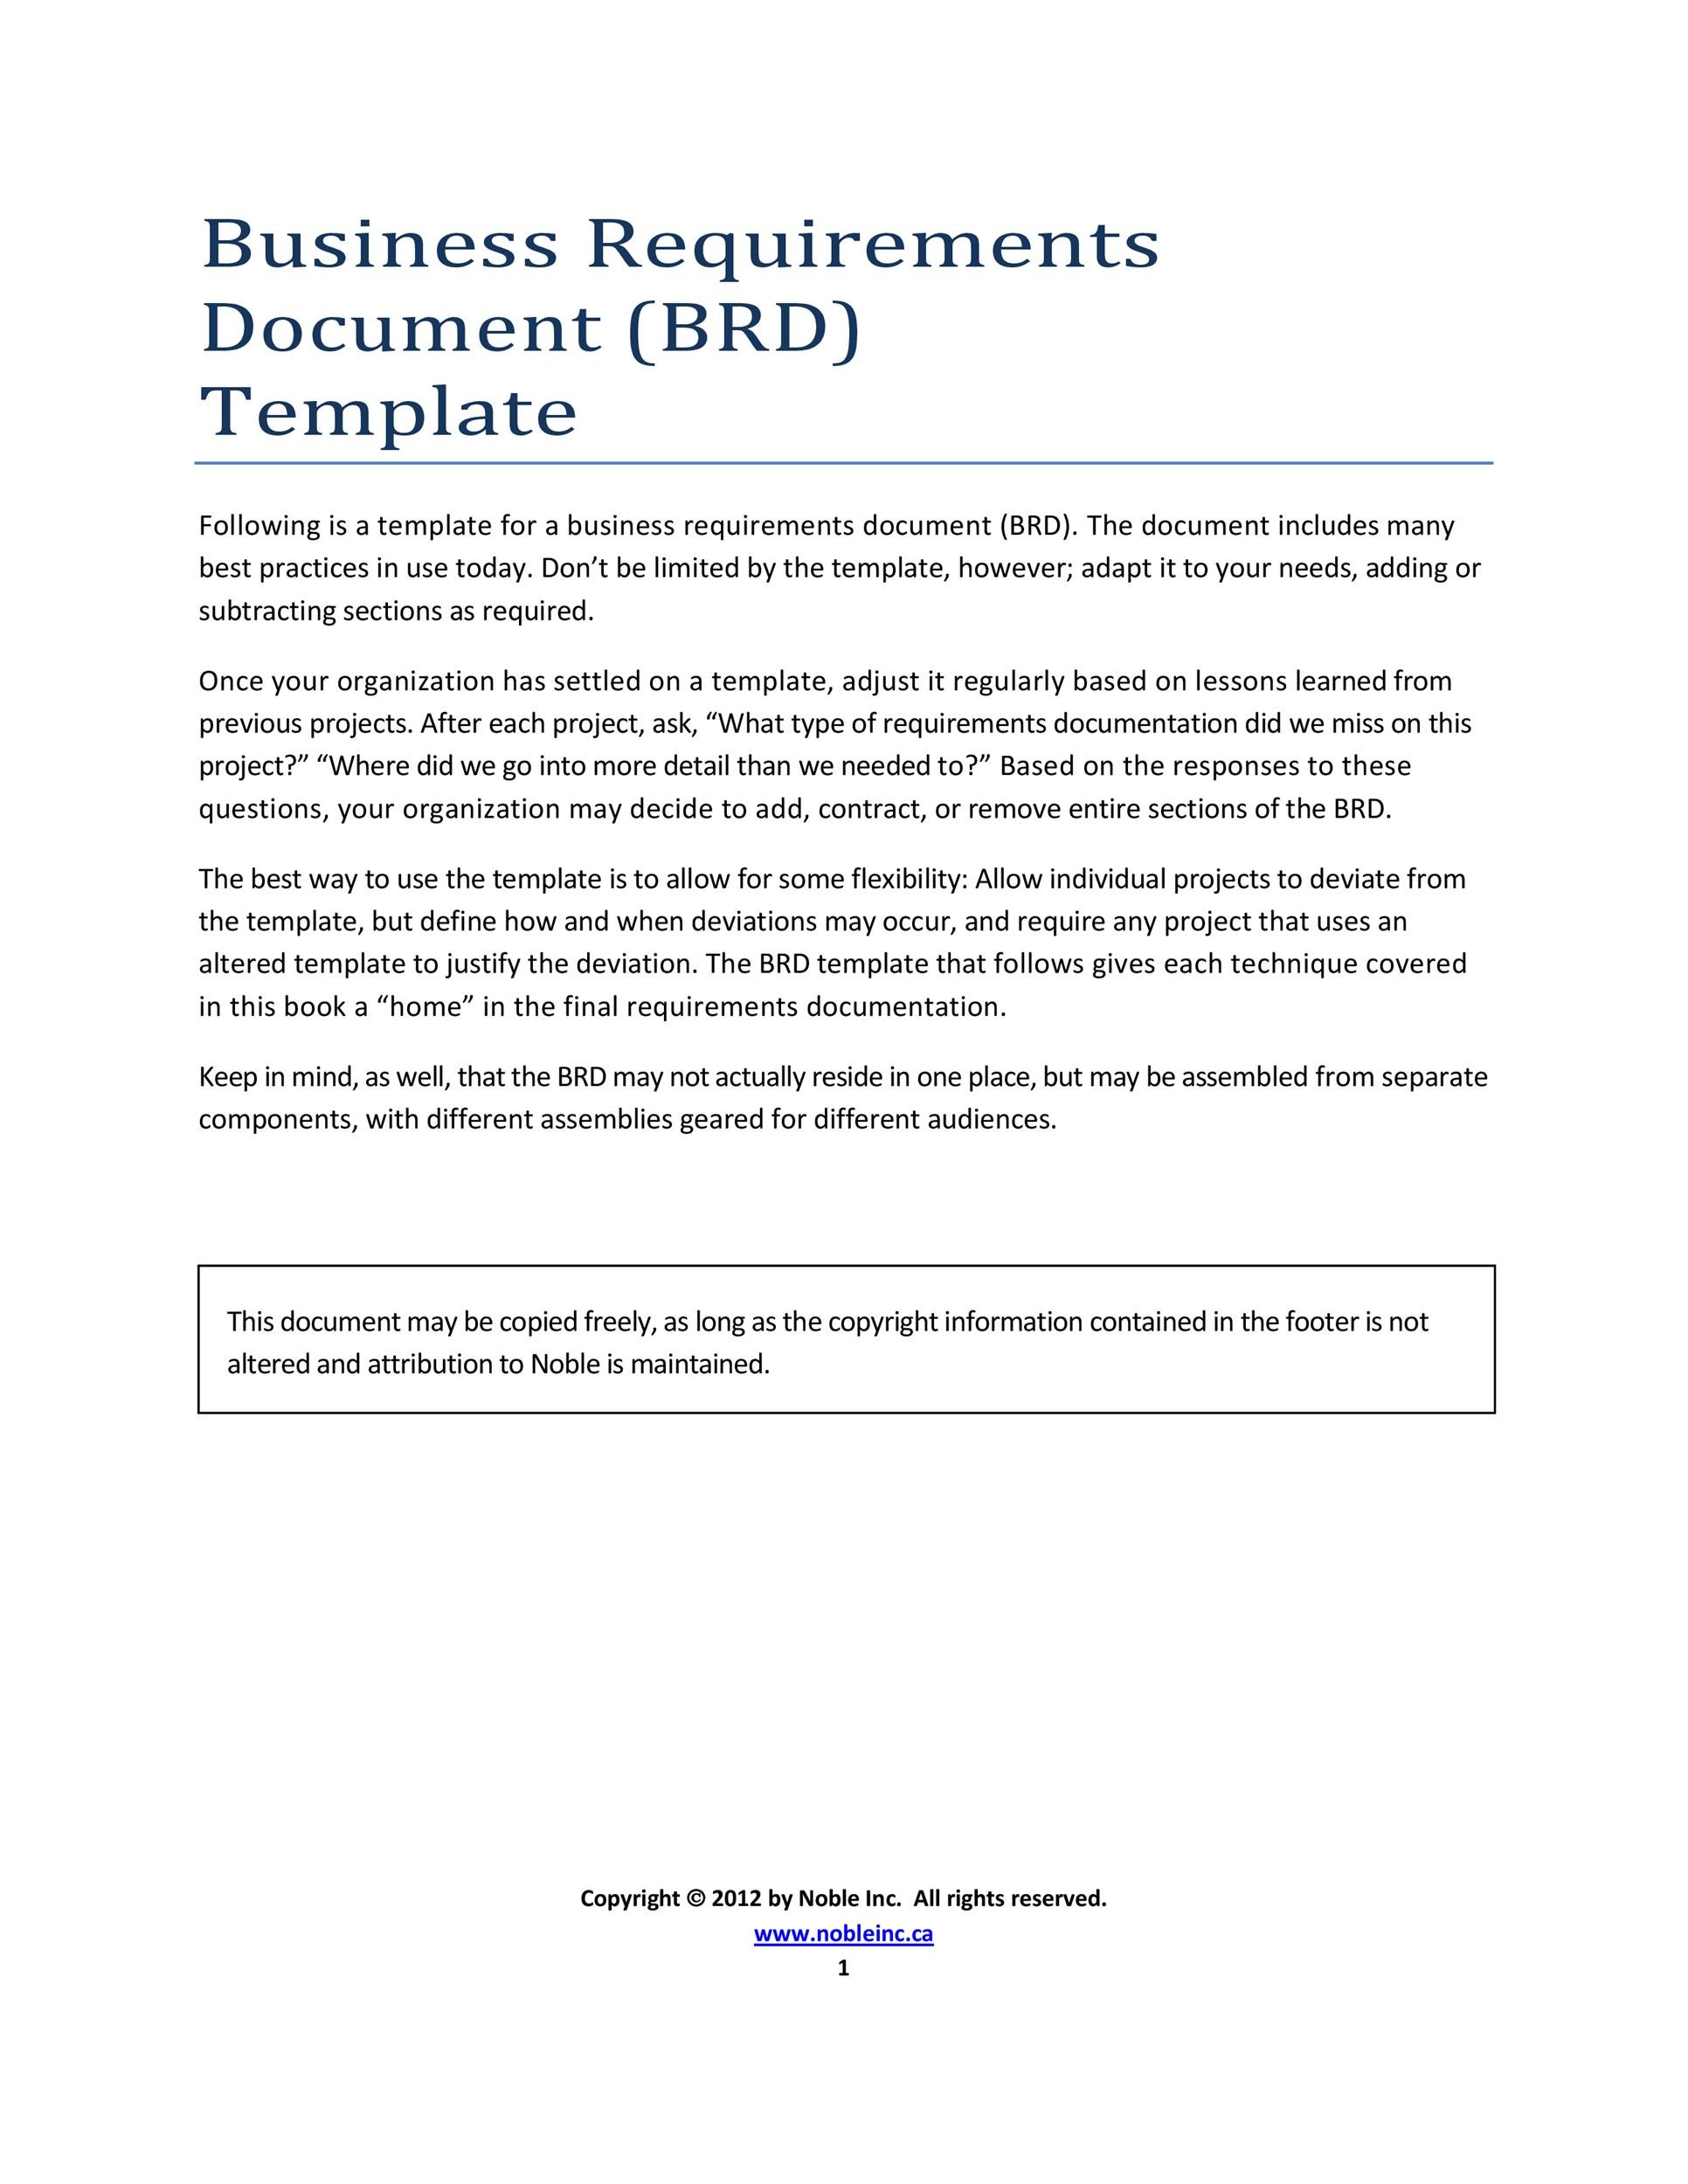 40 Simple Business Requirements Document Templates TemplateLab